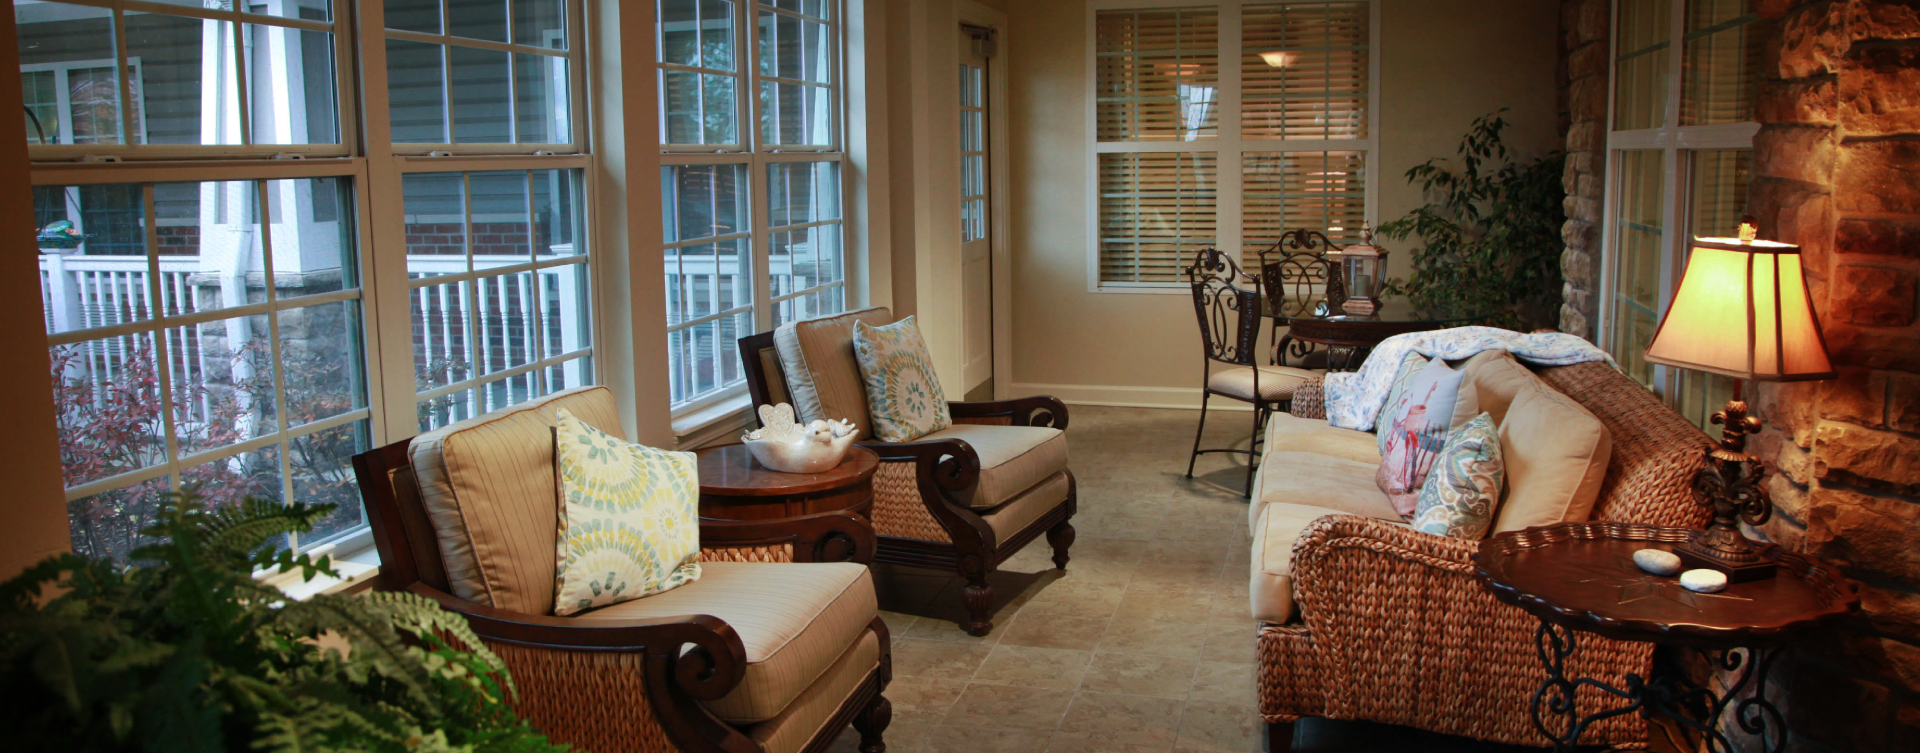 Enjoy the view of the outdoors from the sunroom at Bickford of St. Charles